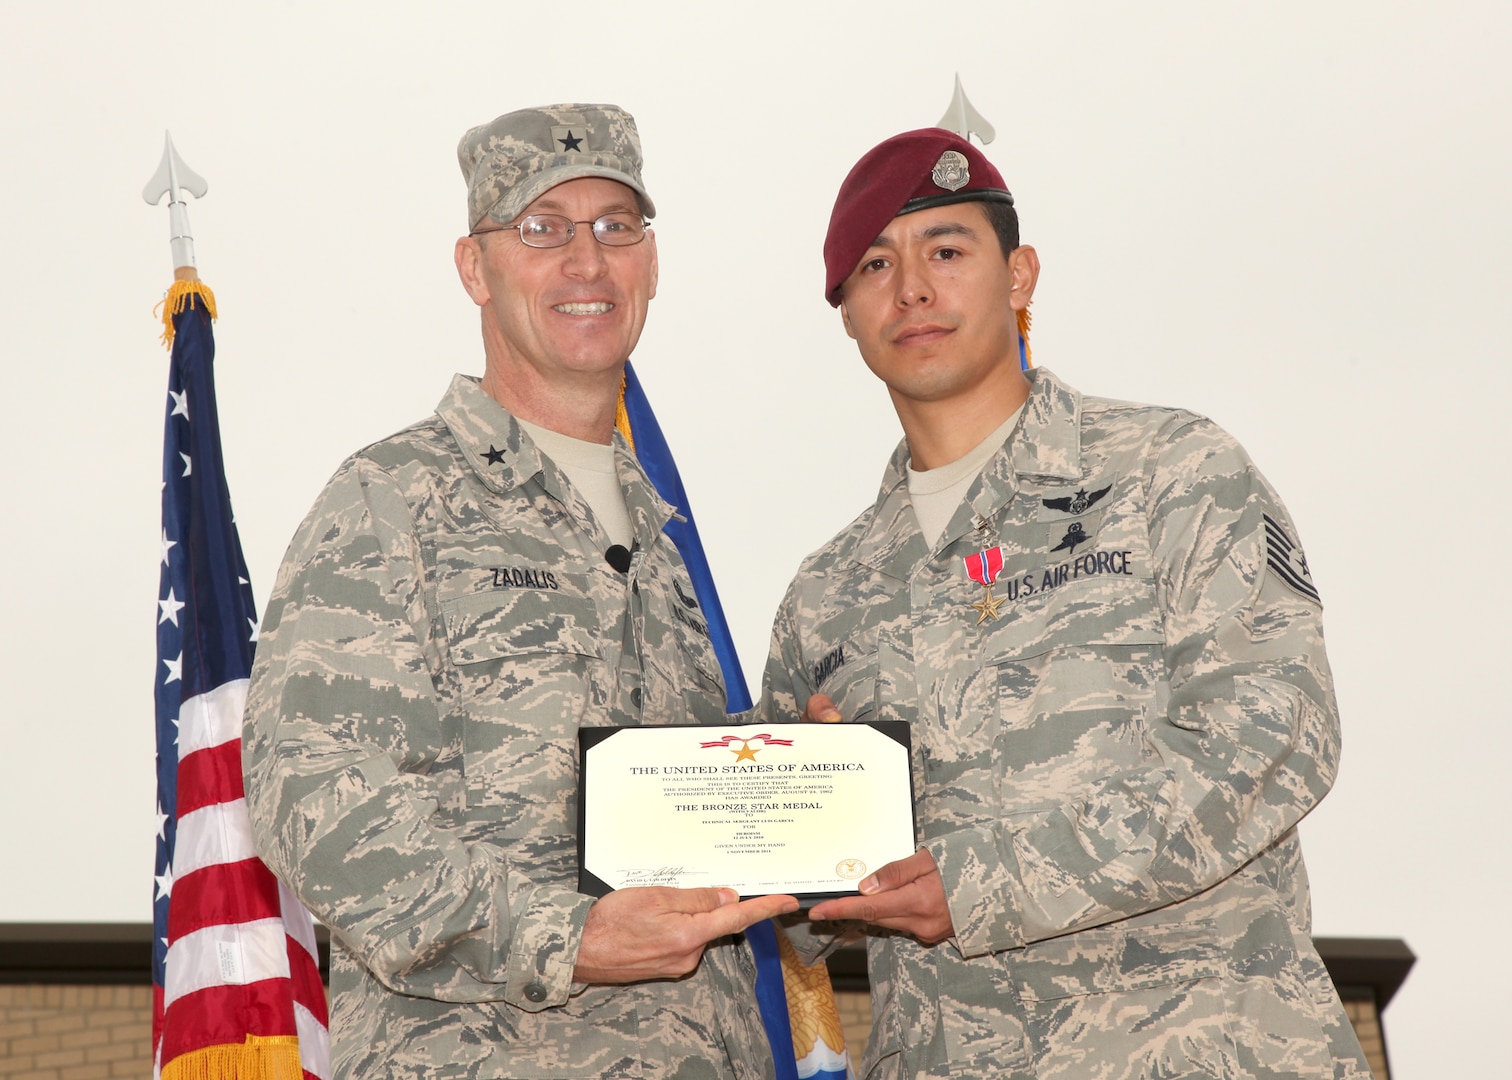 Brig. Gen. Timothy Zadalis, Air Education and Training Command Intelligence, Operations and Nuclear Integration director from Randolph AFB awards Tech. Sgt. Luis Garcia, 342nd Training Squadron pararescueman, with a Bronze Star Medal with Valor during an award ceremony at Lackland Air Force Base, Texas, Dec. 2. Only 414 Bronze Star Medals with Valor have been awarded to Air Force service members since Sept. 11, 2001. (U.S. Air Force photo/Robbin Cresswell)